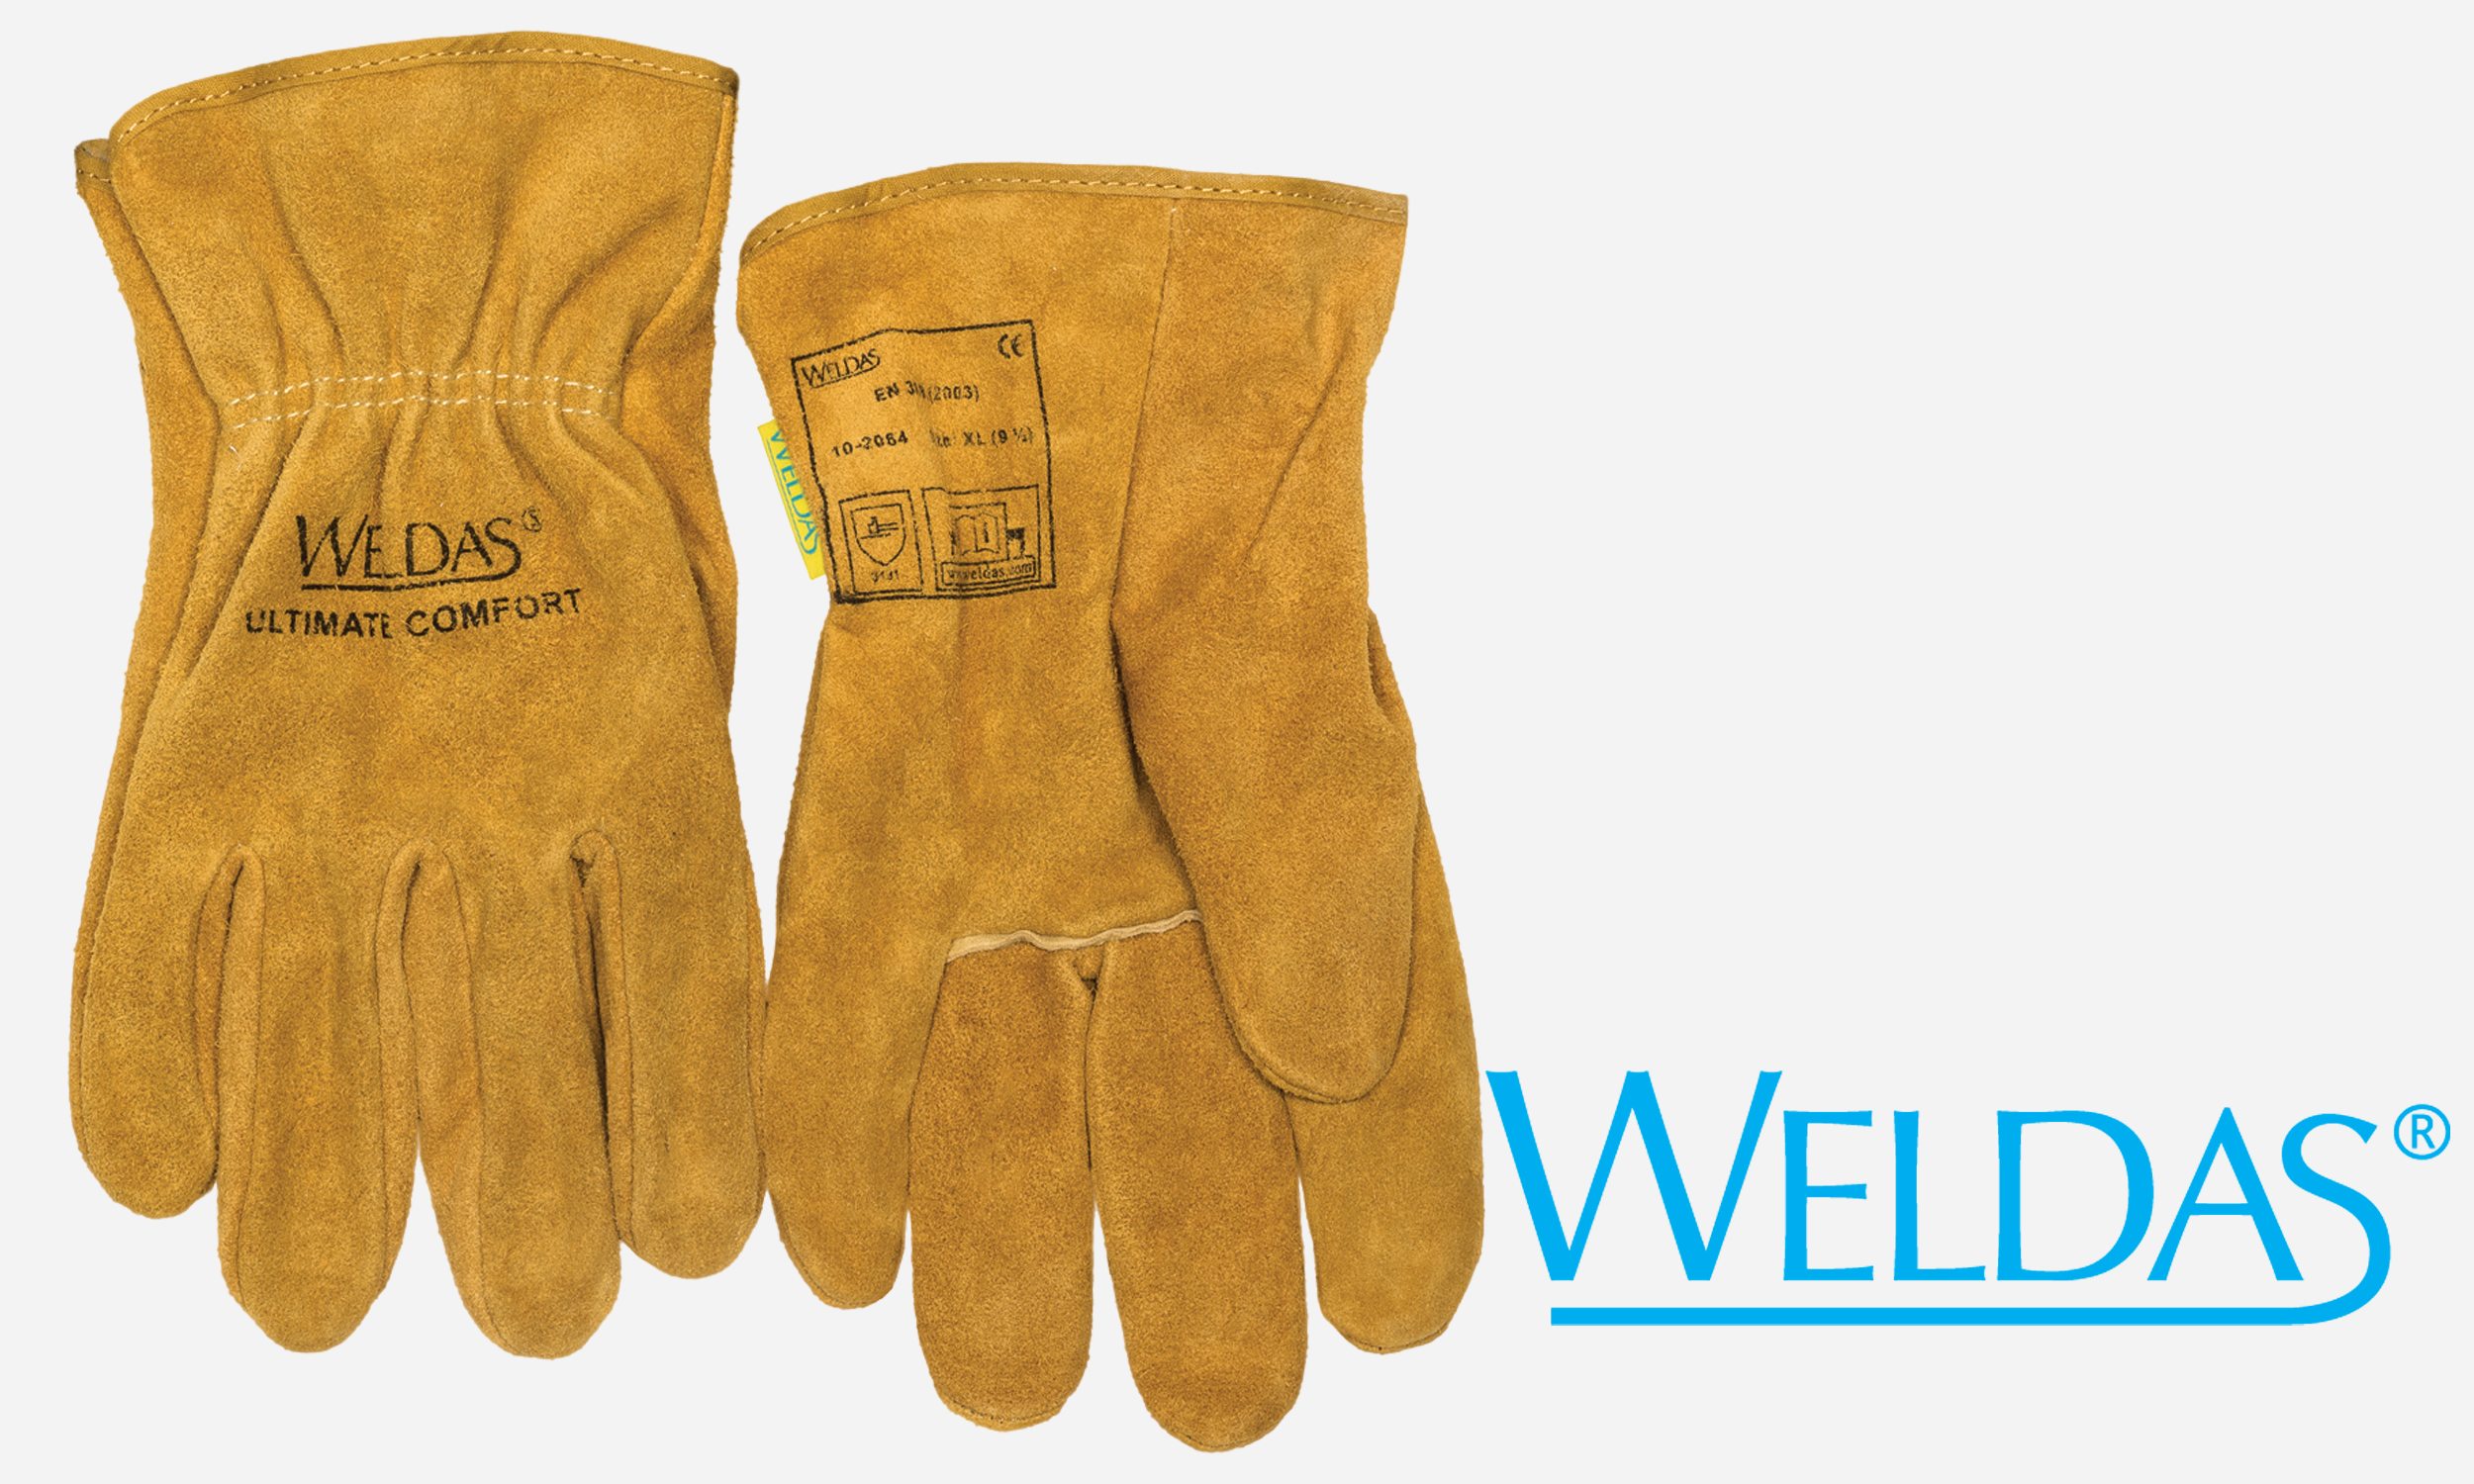 Drivers TIG Welding  Quality! Professional Full Soft Leather Driving Gloves